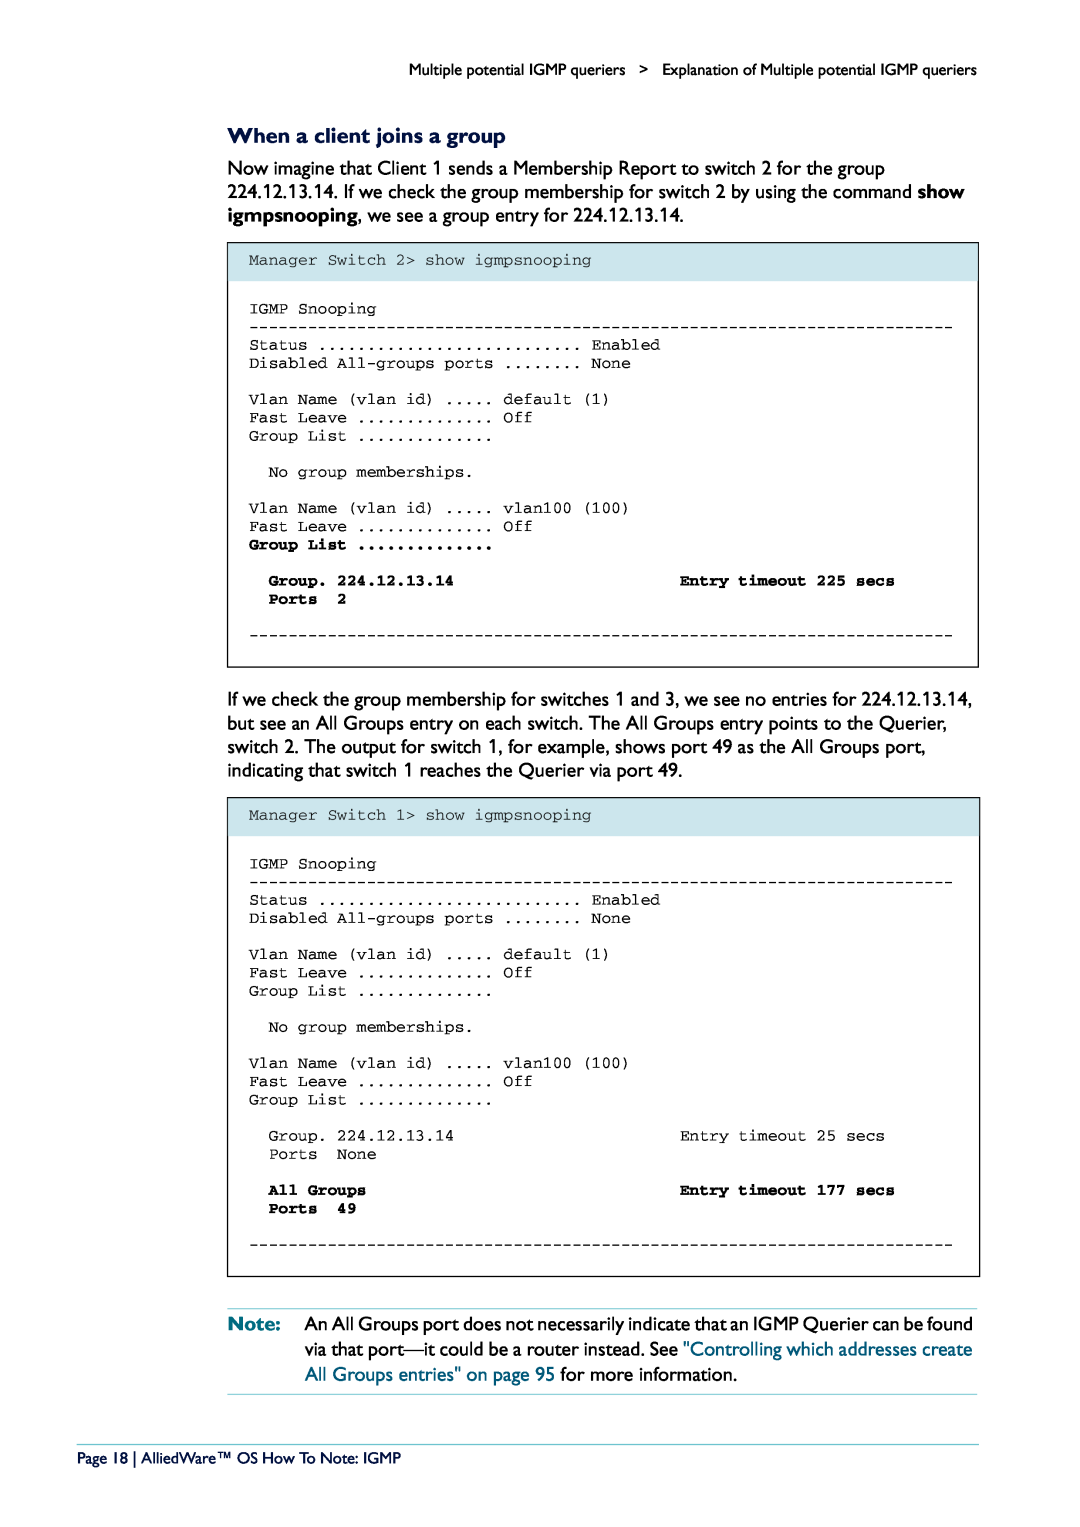 Allied Telesis AR400 manual When a client joins a group, Page 18 AlliedWare OS How To Note IGMP 